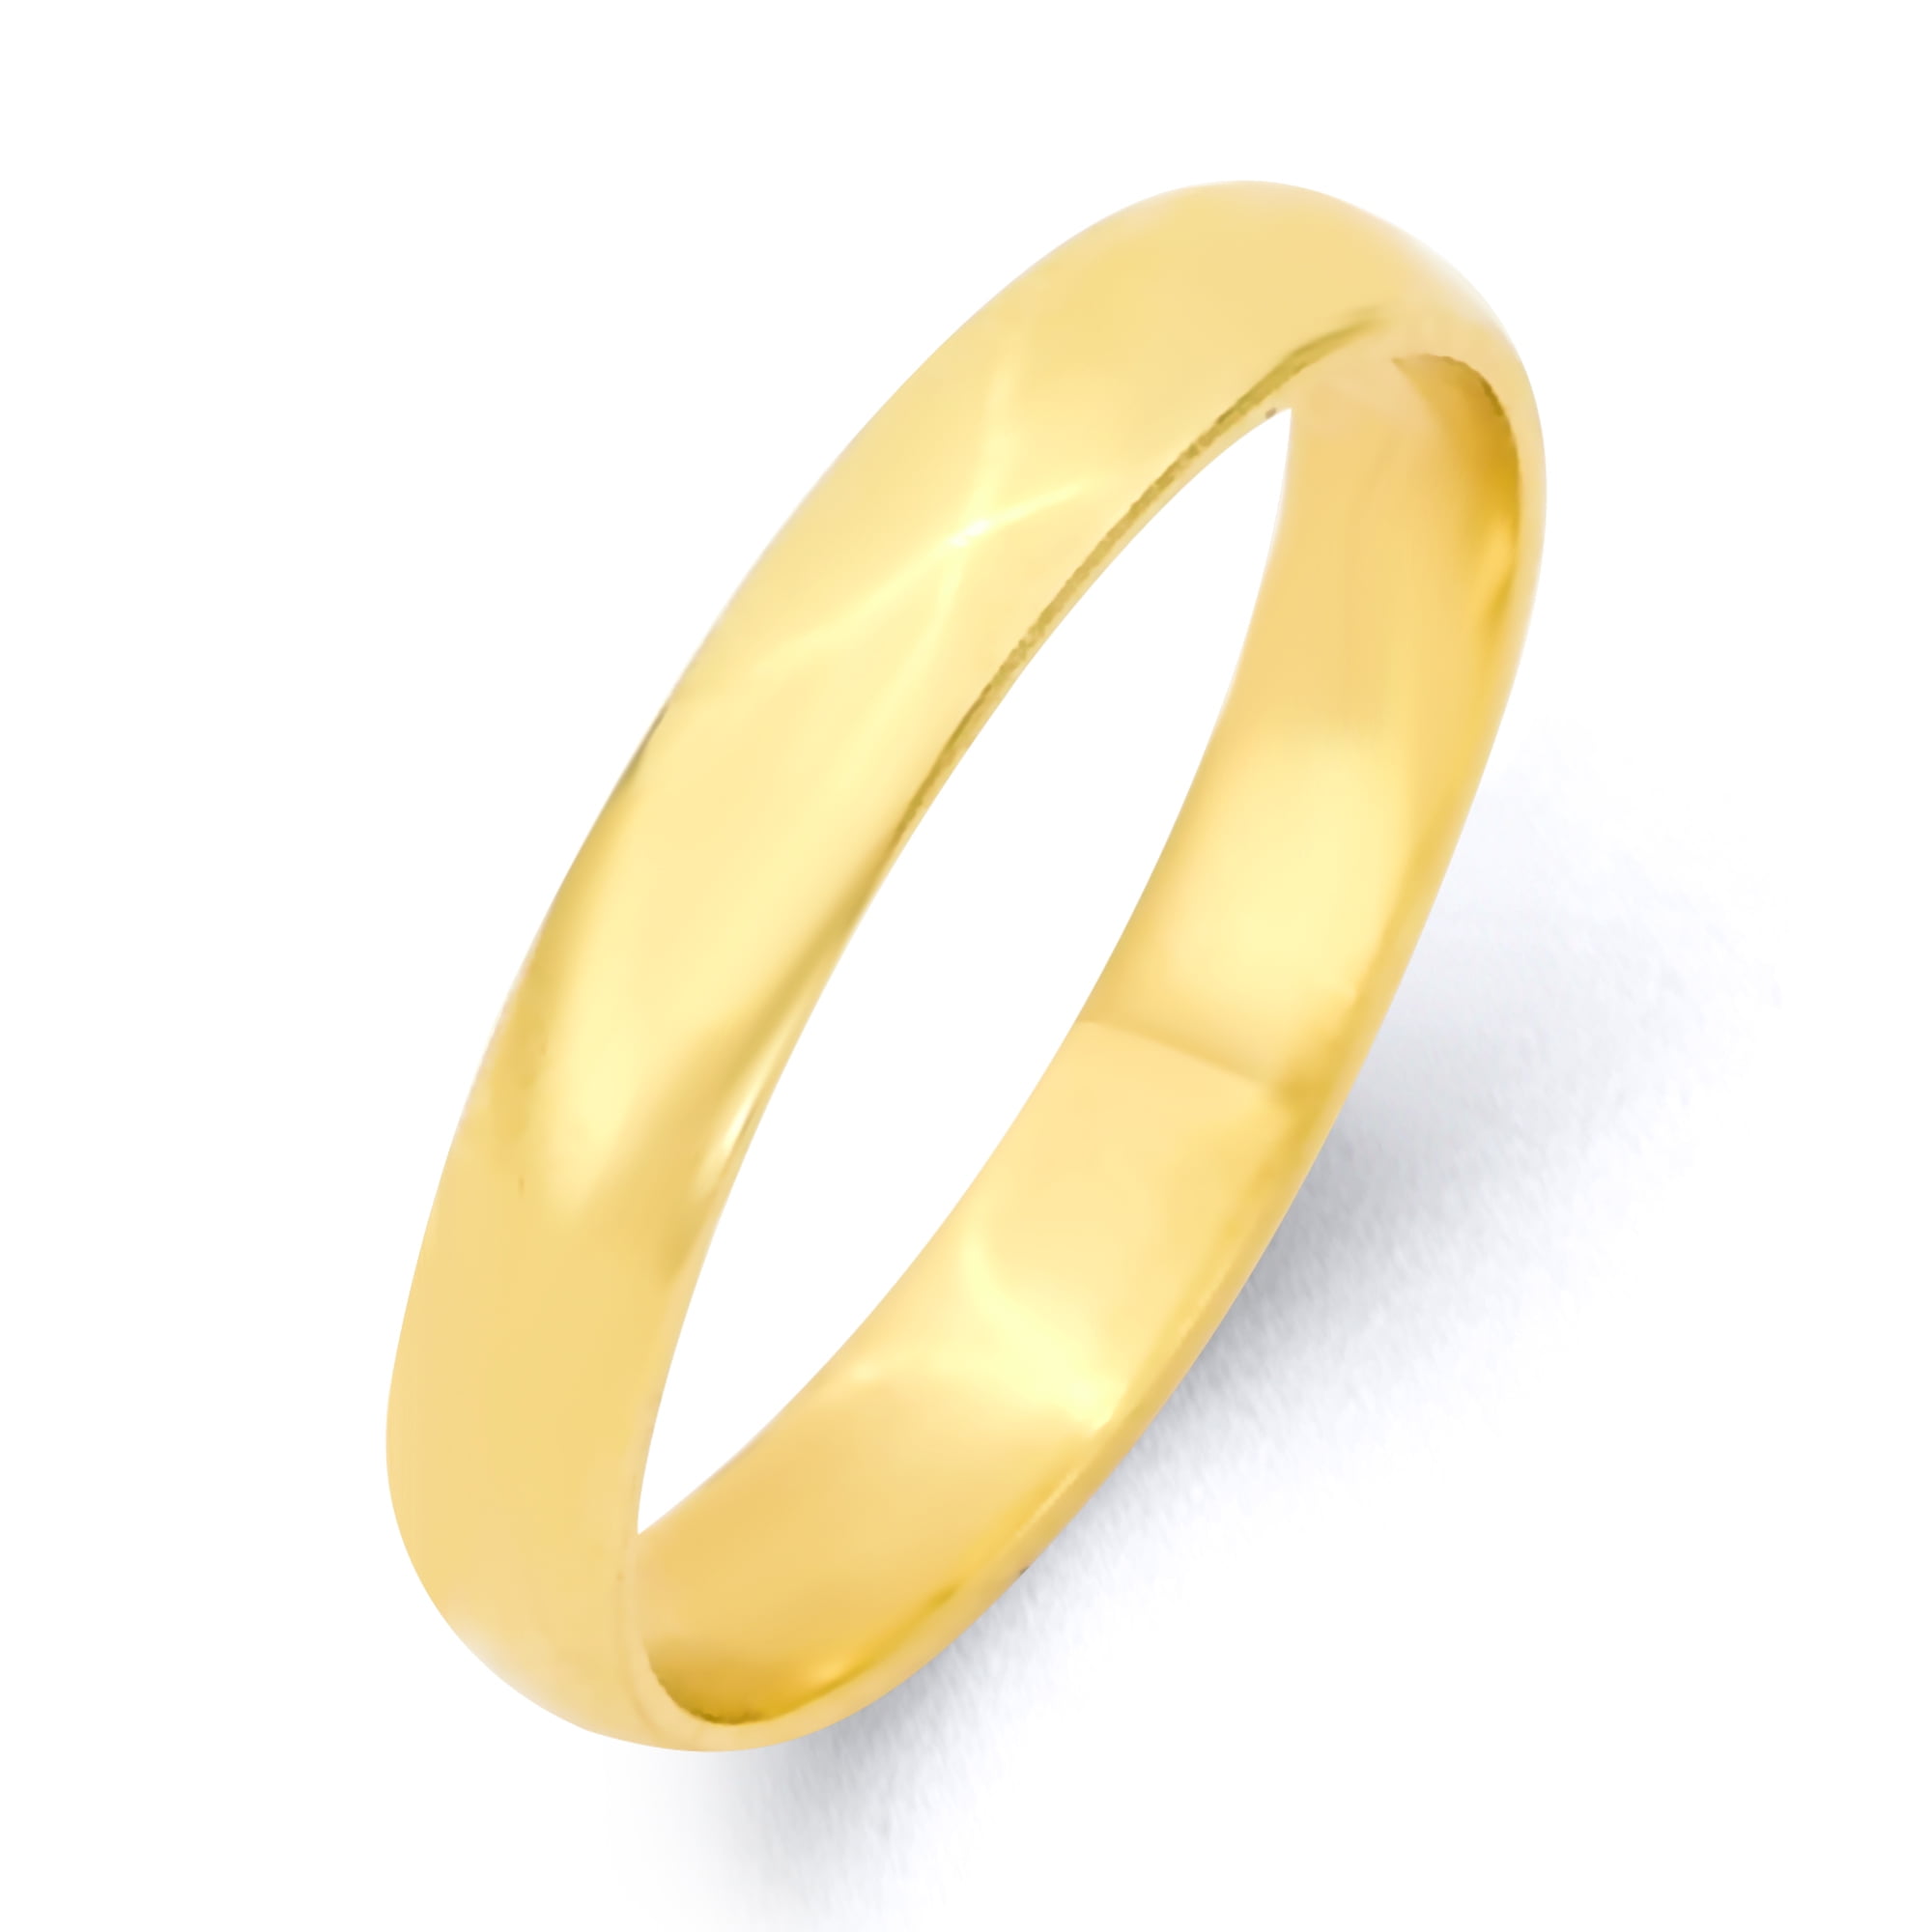 Clearance 10kt Solid Yellow Gold 4mm Size 7 Plain Mens Women Wedding Band Ring